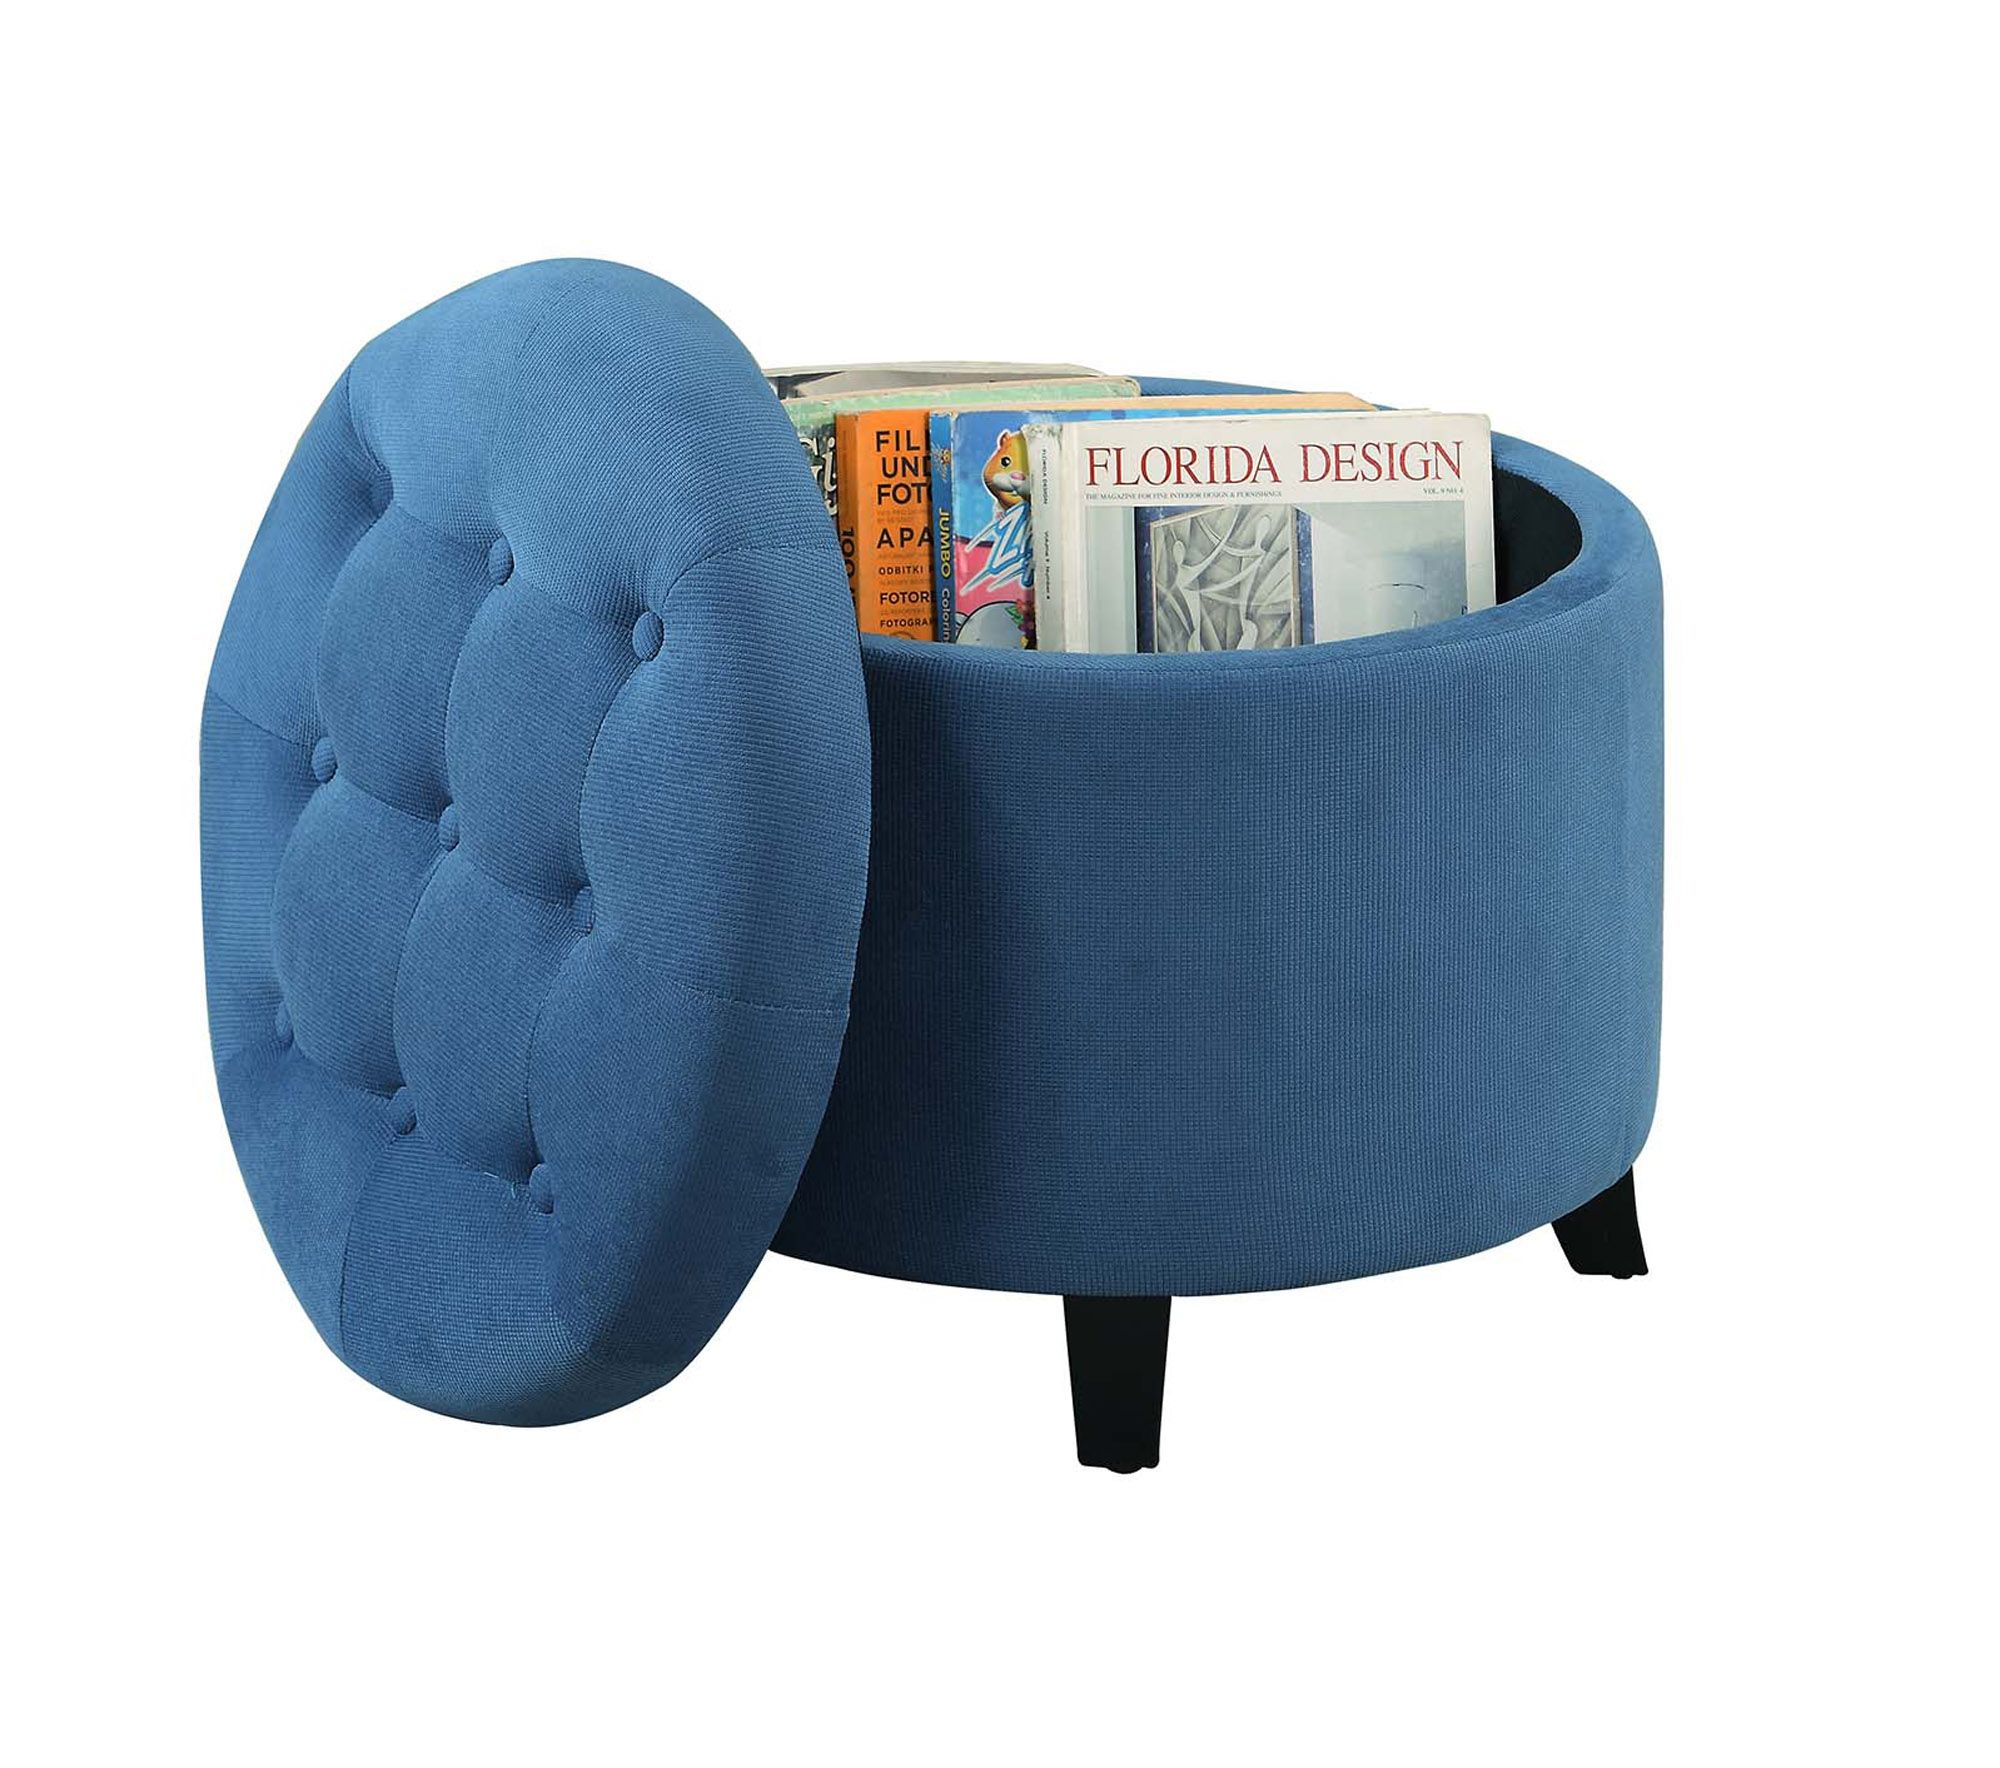 Designs4comfort Round Ottoman 163060fbe, Blue Finish 95285414314 | Ebay In Round Blue Faux Leather Ottomans With Pull Tab (View 3 of 20)